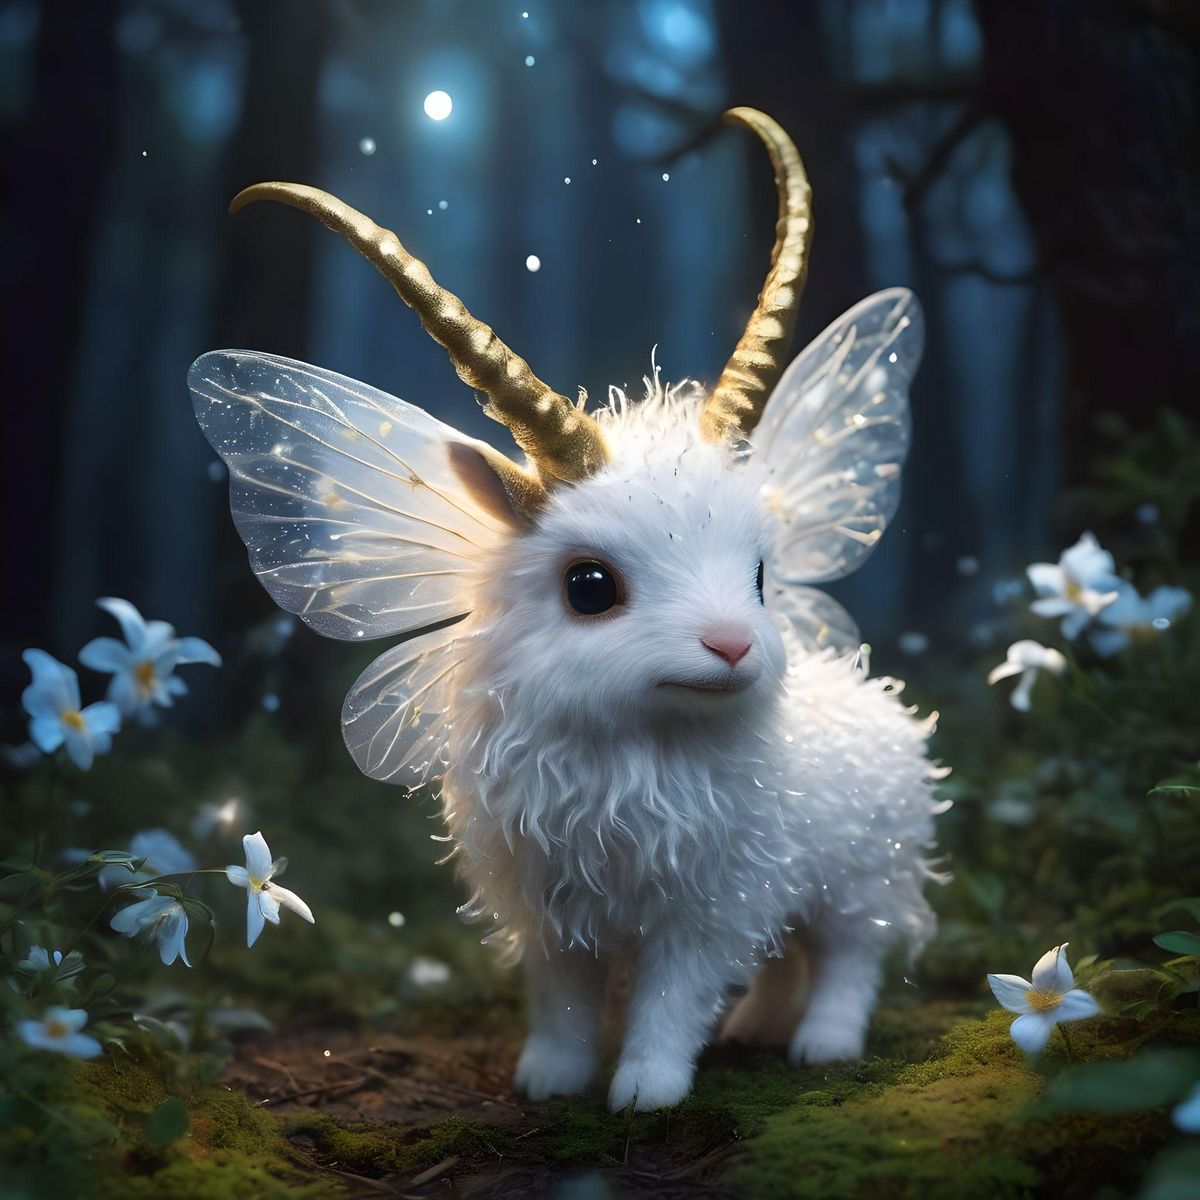 magical baby animal, gold blue, gold horns, extra fluffy fluffy white with wings, dark forest, fireflies and flowers